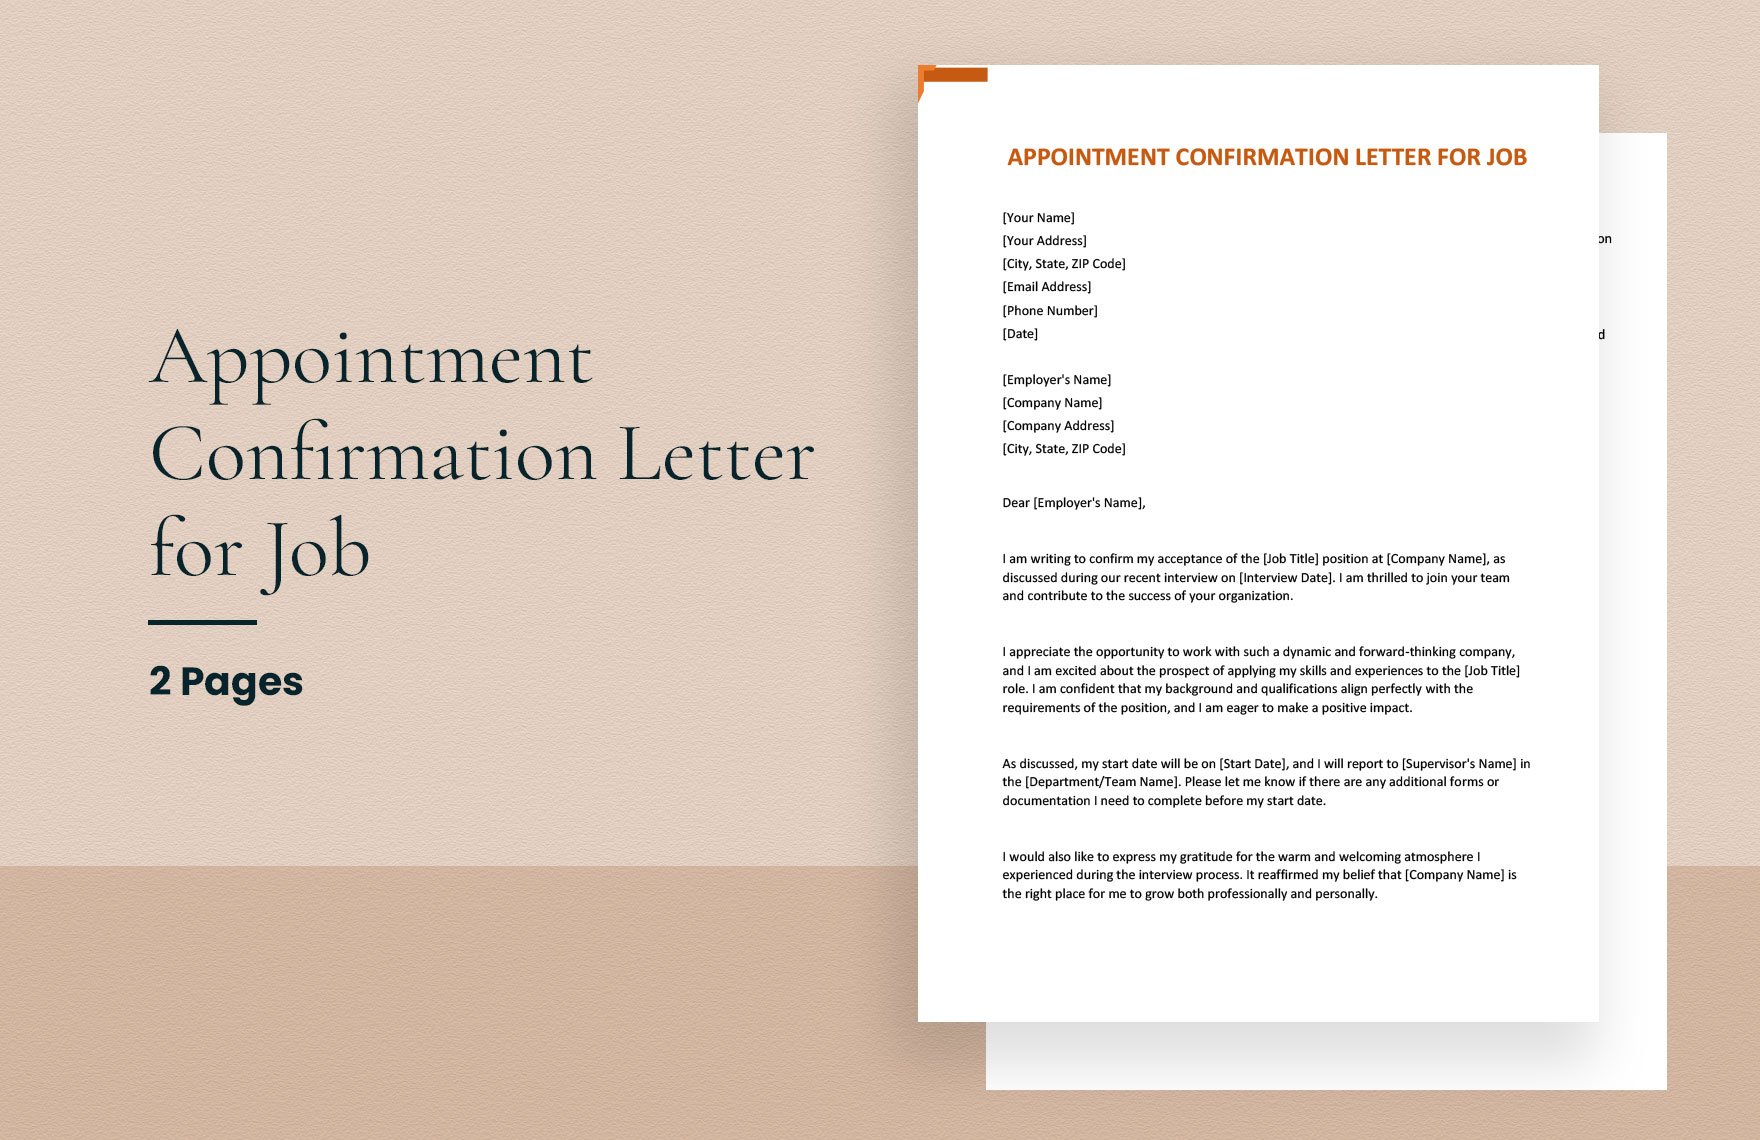 Appointment confirmation letter for job